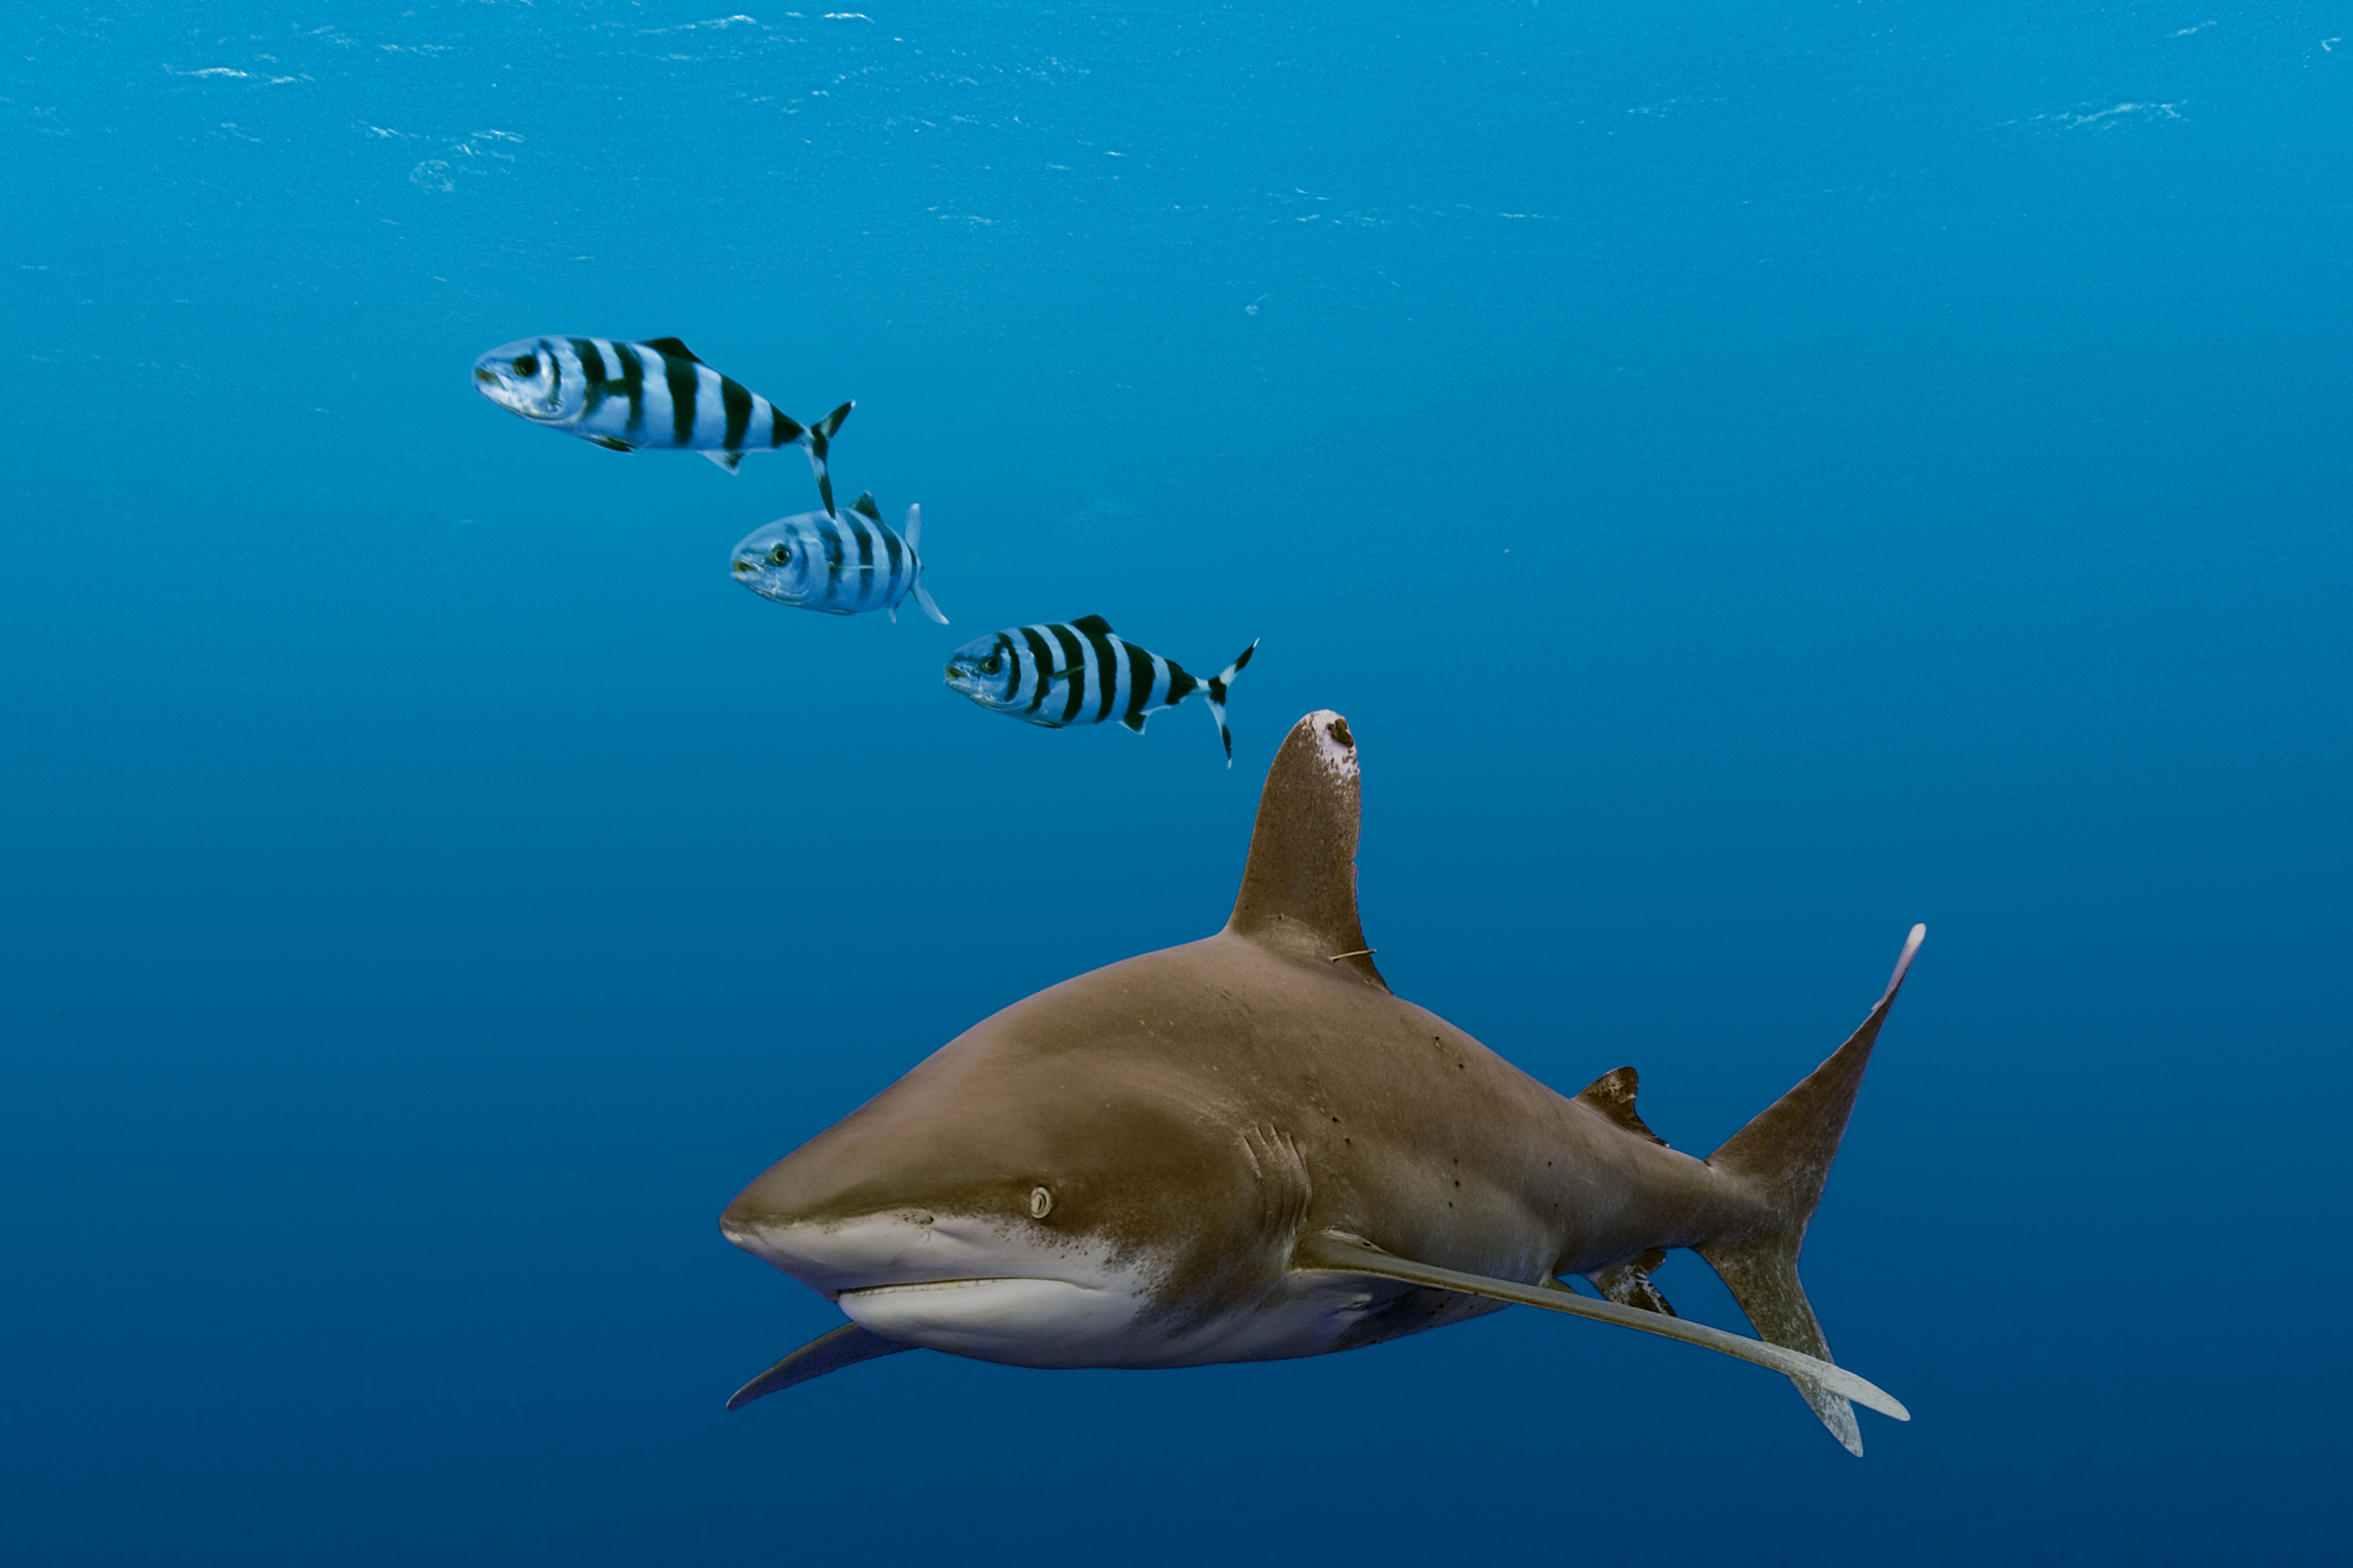 Oceanic Whitetip Sharks Once Ruled the Seas. Now Their Population Is ...